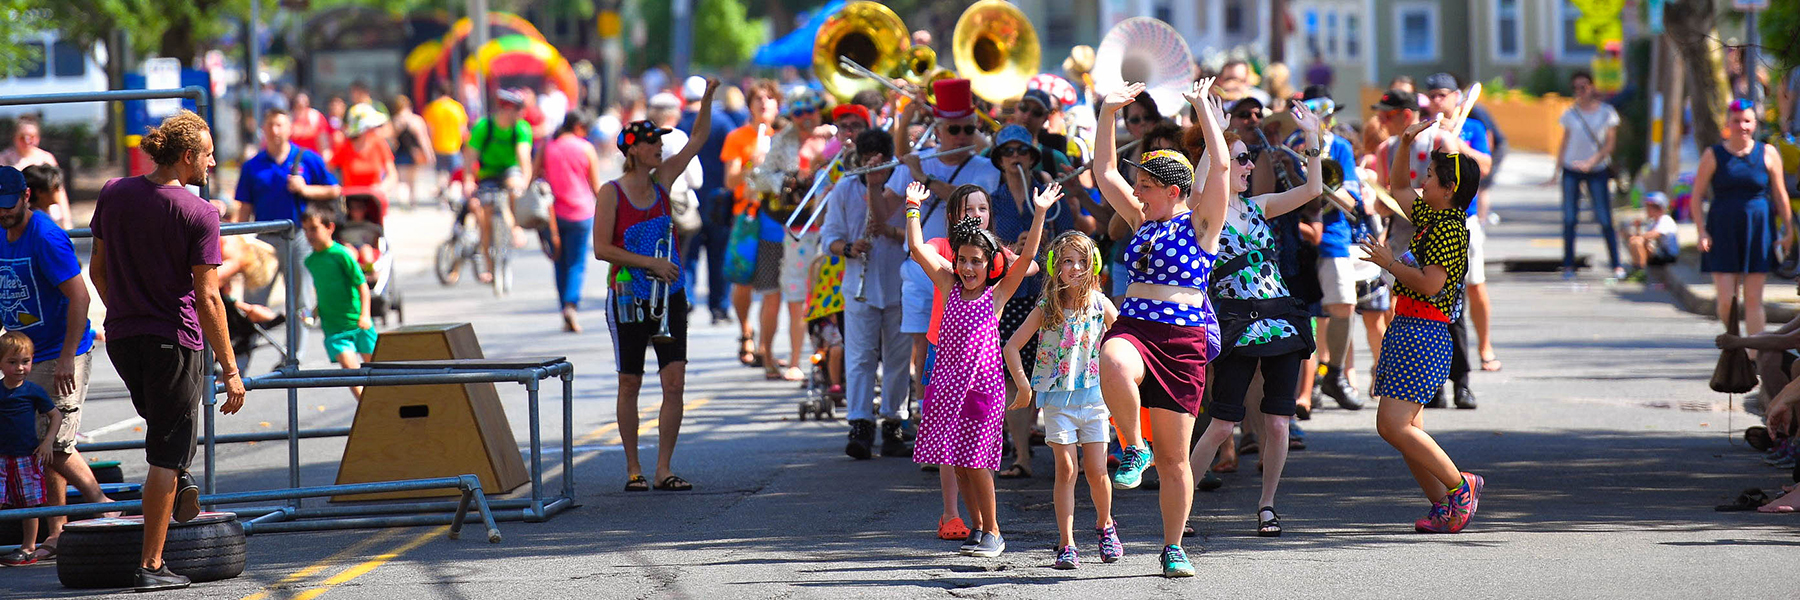 Community Parade in Somerville